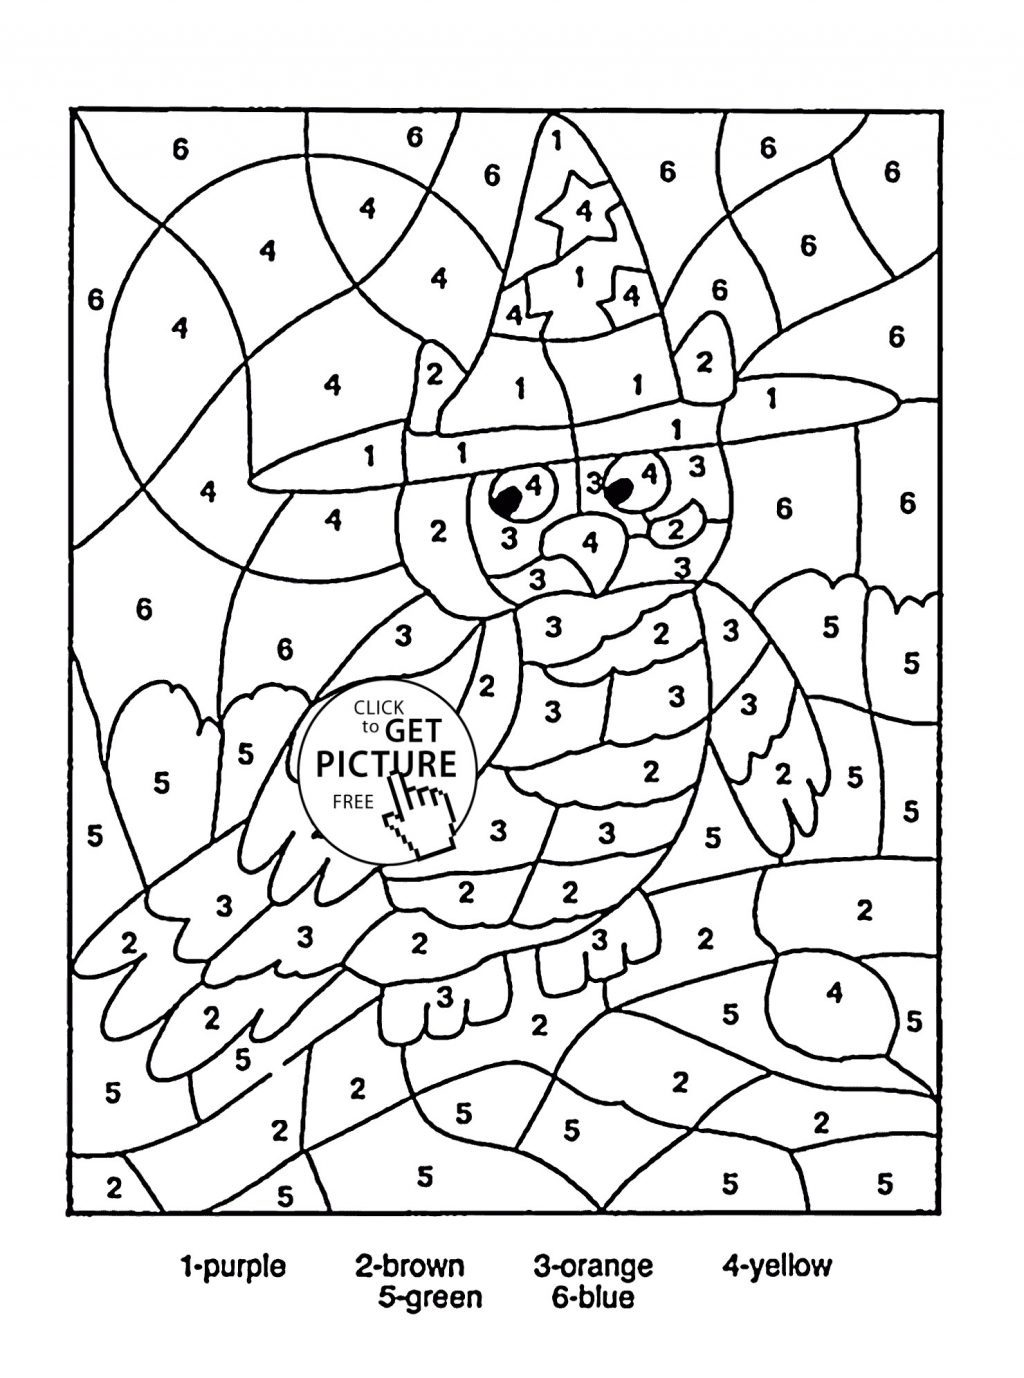 Color Orange Coloring Pages Coloring Pages Coloring Pages Page For Kids With Numbers Appealing